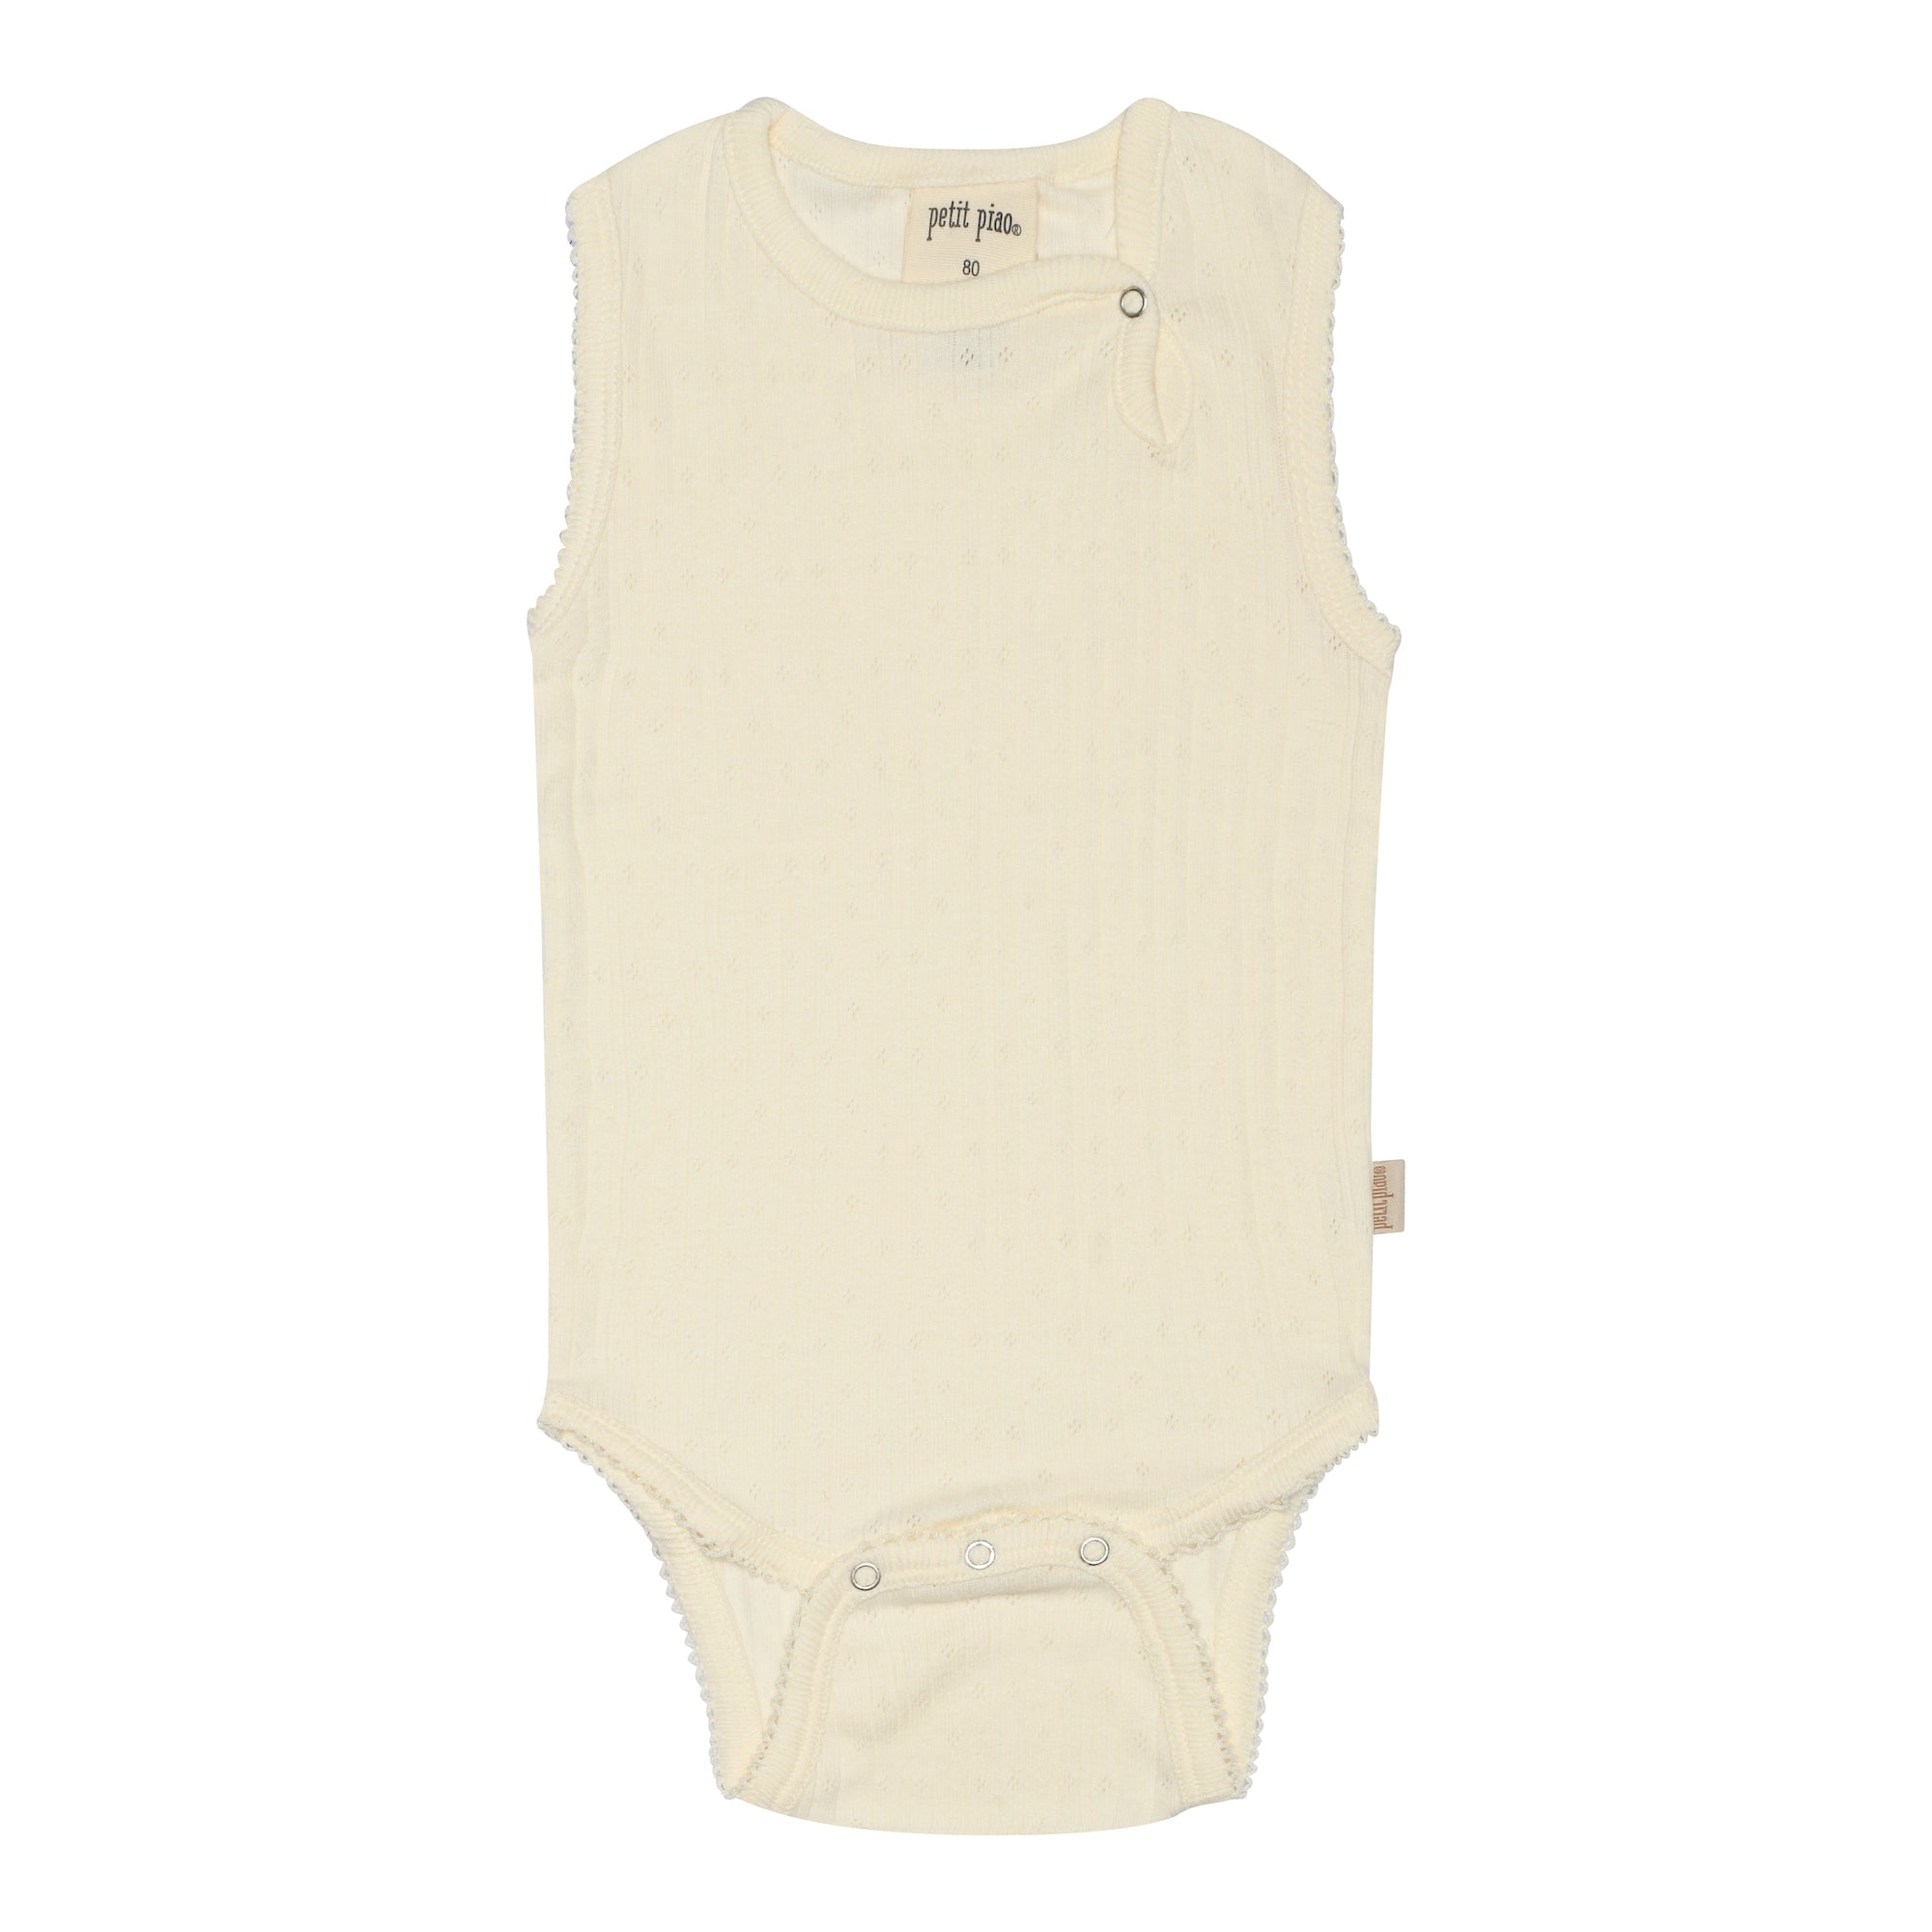 Petit Piao - Body Vest Pointelle, PP1618 - Offwhite